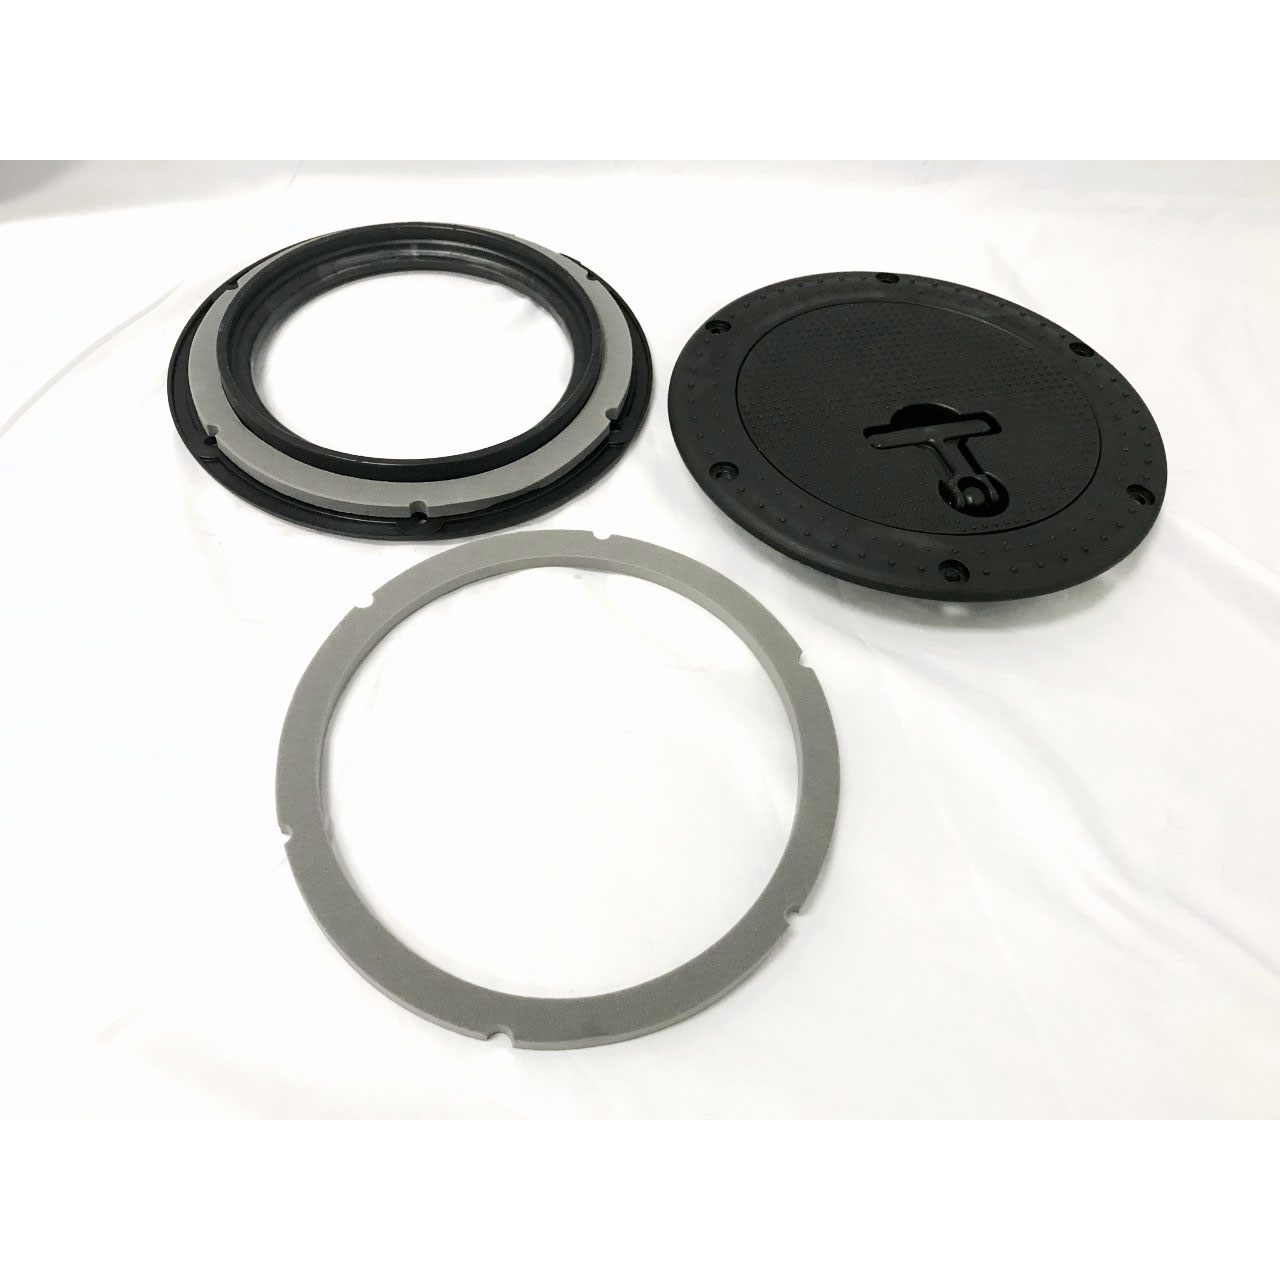 Portable 7 Inch Waste Tank Lid Gasket Only Sandia Plastic 10-0804-A Mytee G091